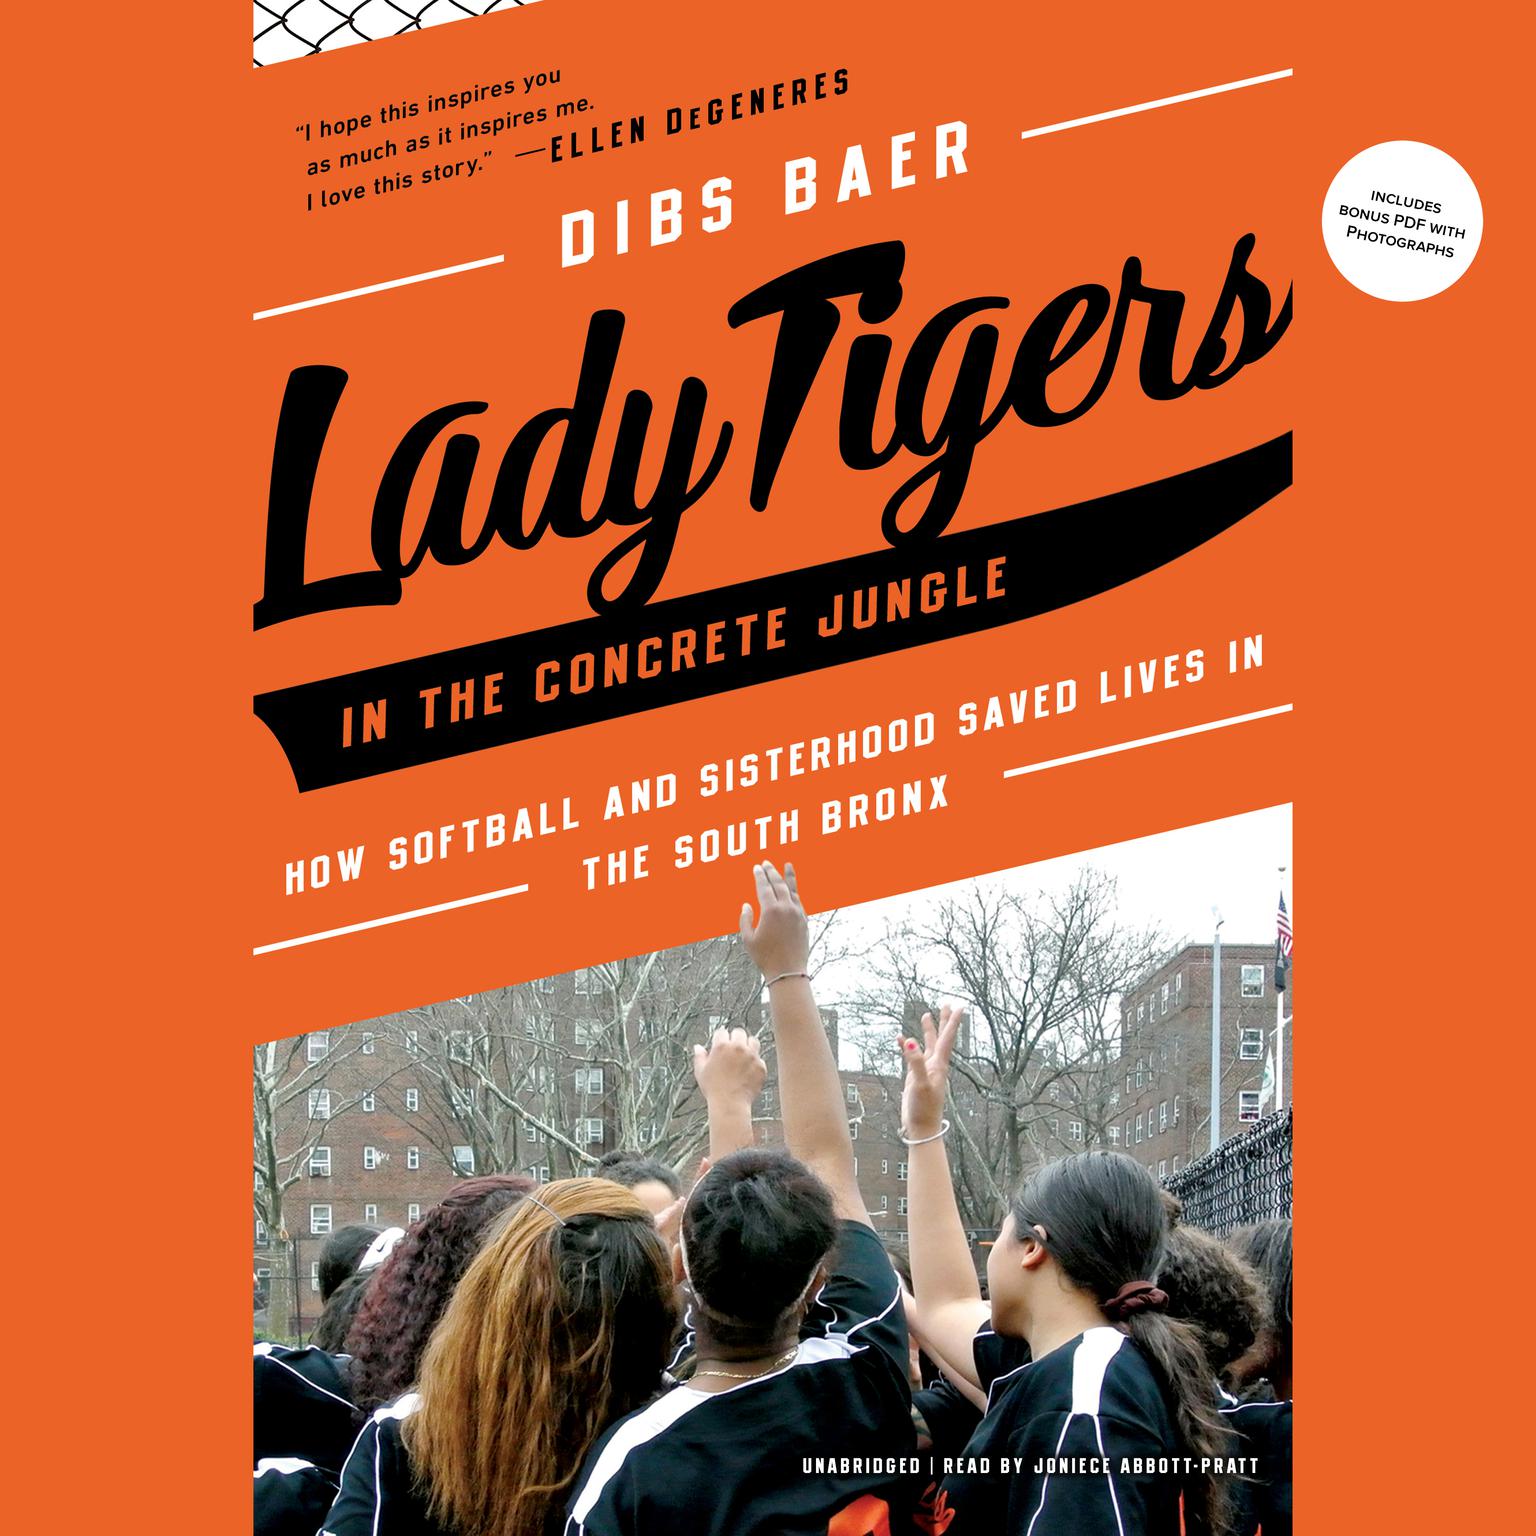 Lady Tigers in the Concrete Jungle: How Softball and Sisterhood Saved Lives in the South Bronx Audiobook, by Dibs Baer